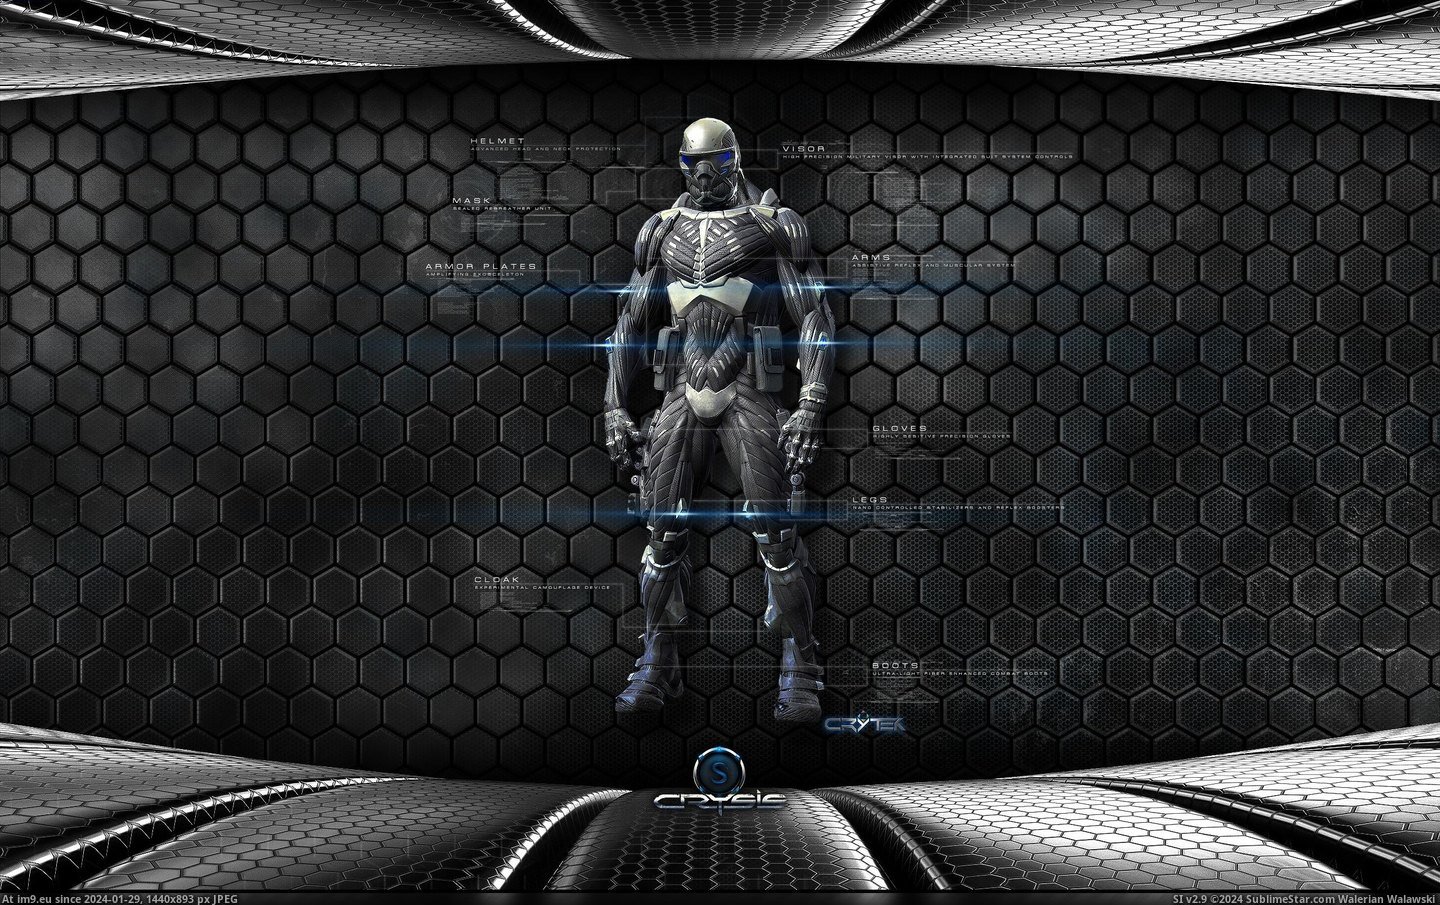 #Game #Crysis #Video Video Game Crysis 211440 Pic. (Image of album Games Wallpapers))